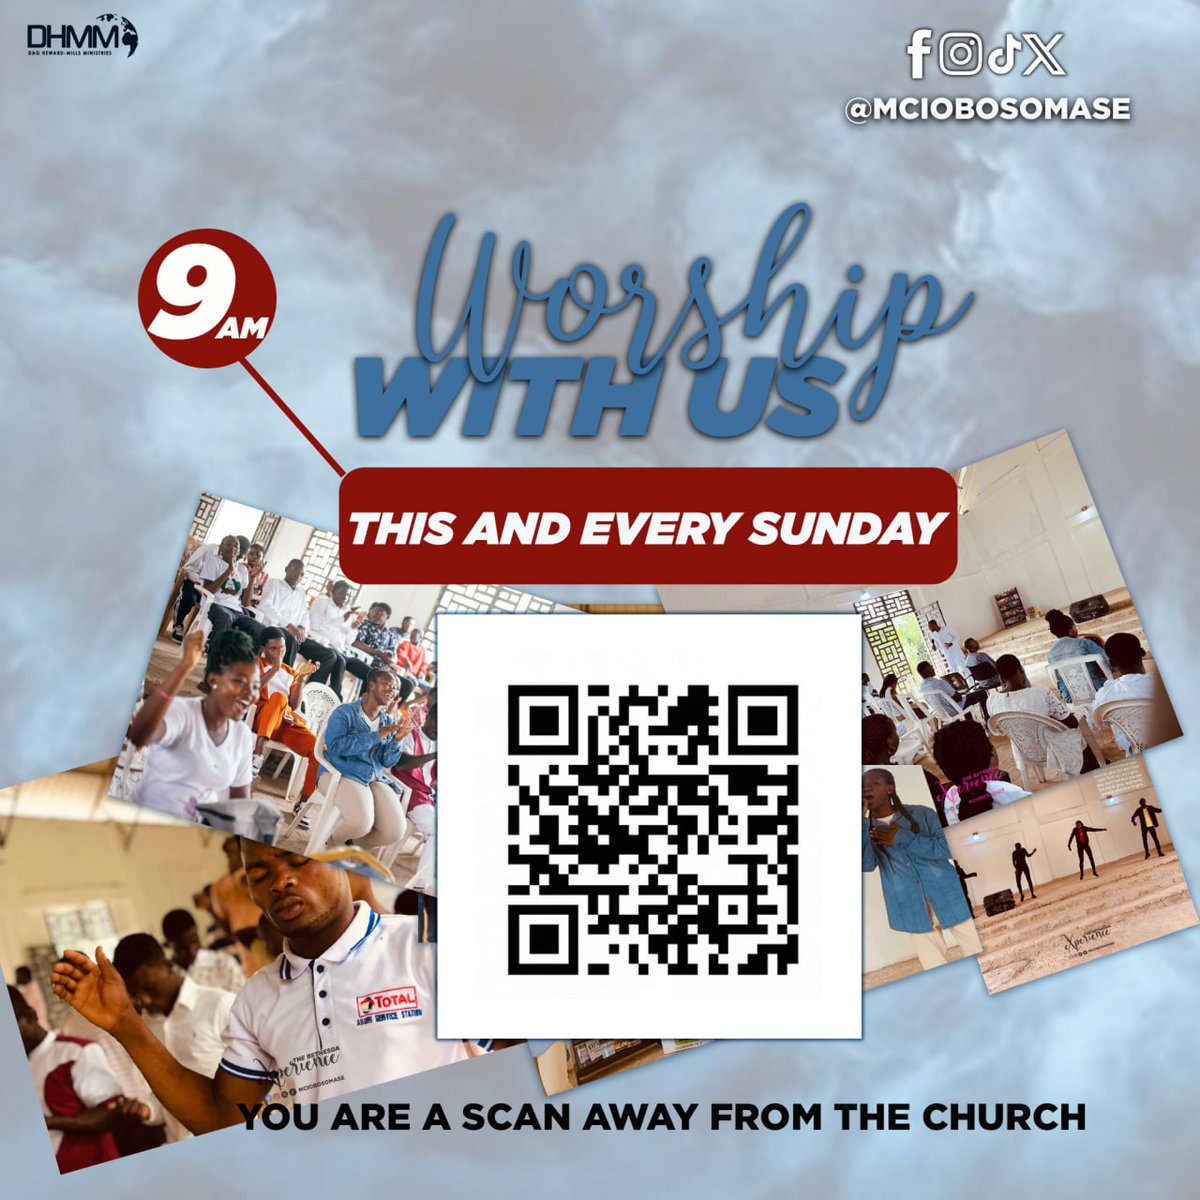 YOU ARE ONLY A SCAN AWAY FROM FELLOWSHIPPING WITH US! Join us at the church premises this and every Sunday. 

#TheBethesdaExperience #MCI_OBOSOMASE